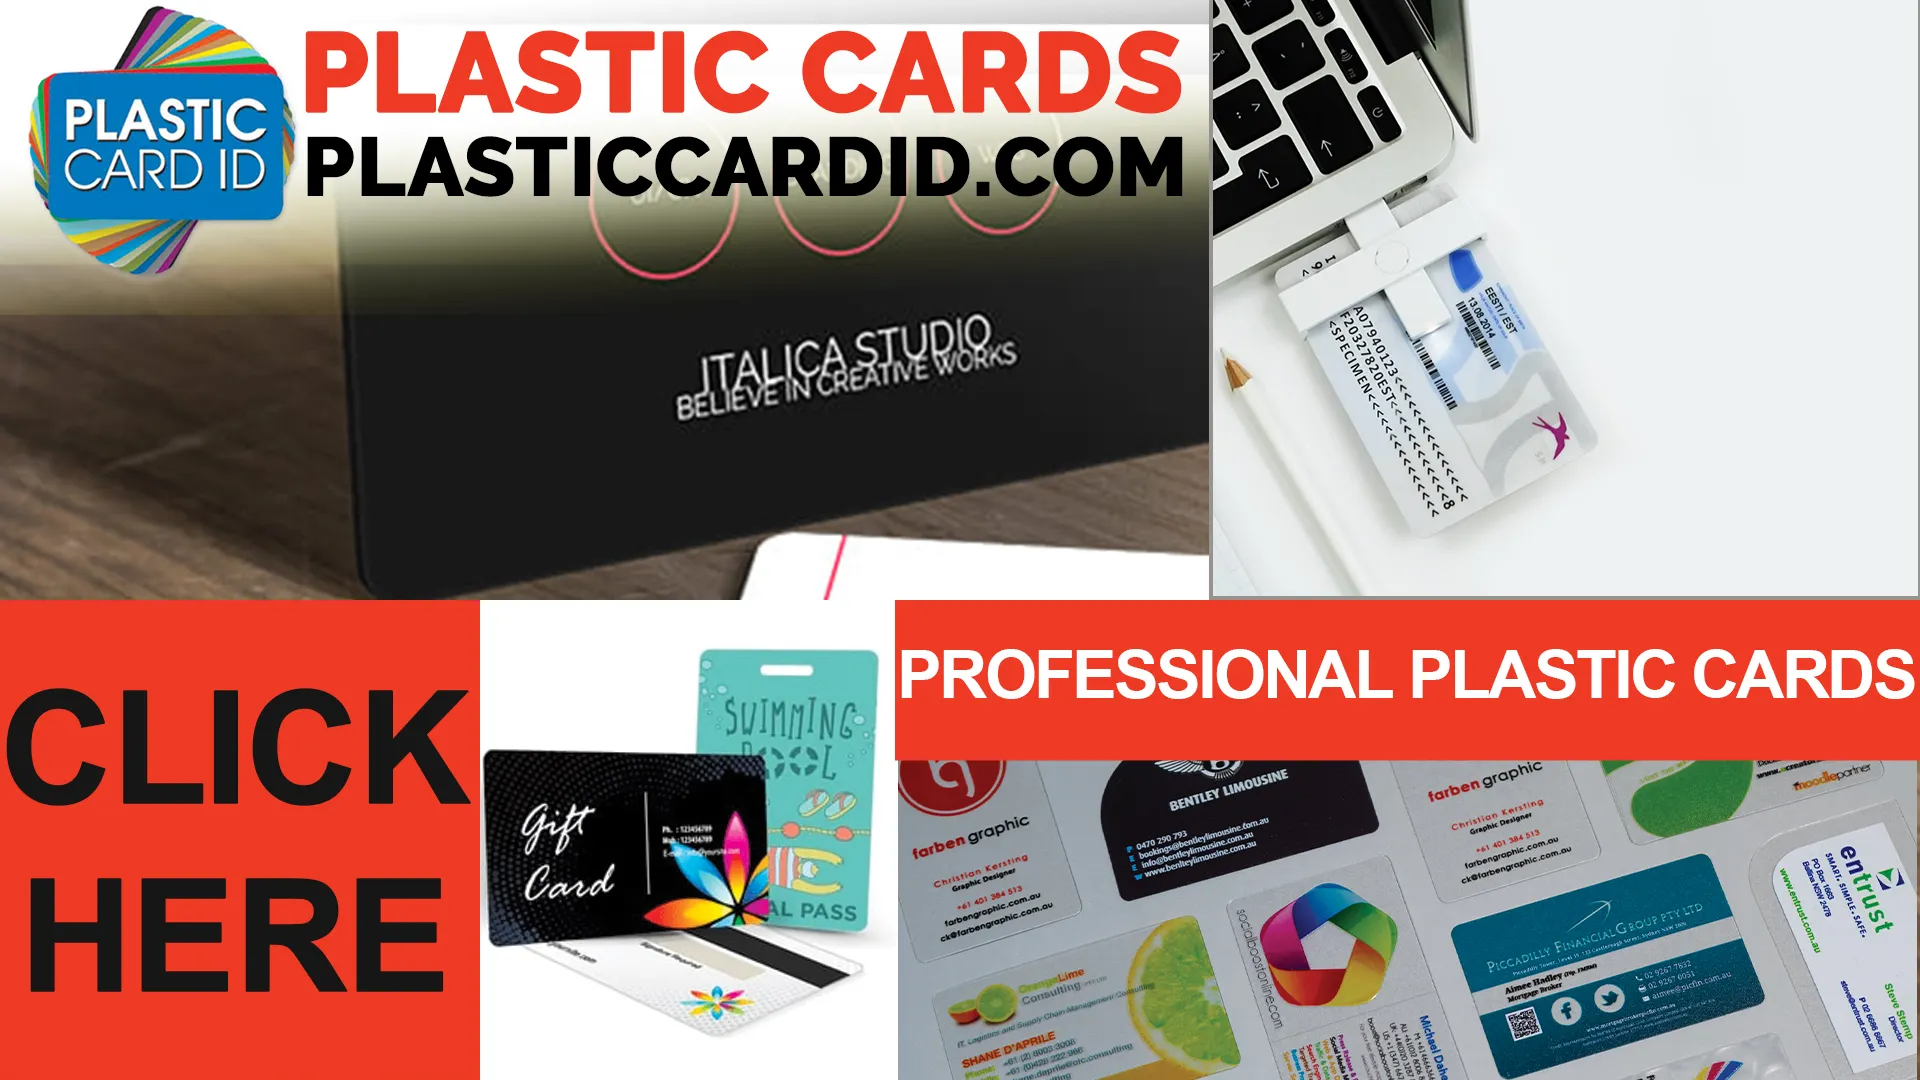 Smart Design Meets Cost-Efficiency: Your Go-To for Impactful Plastic Cards 